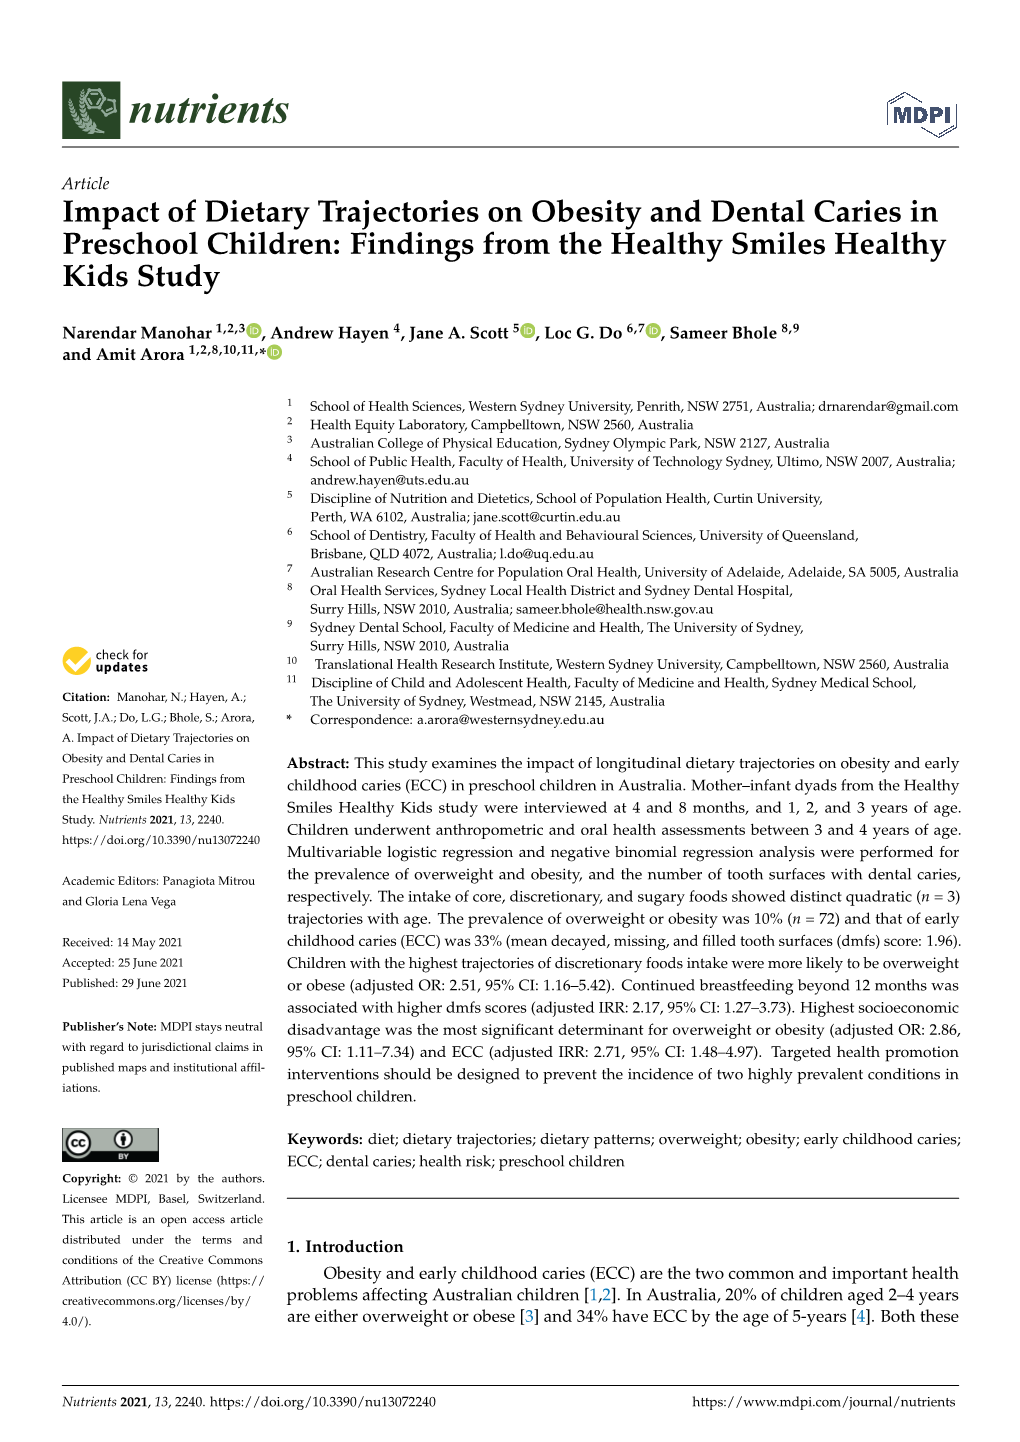 Impact of Dietary Trajectories on Obesity and Dental Caries in Preschool Children: Findings from the Healthy Smiles Healthy Kids Study